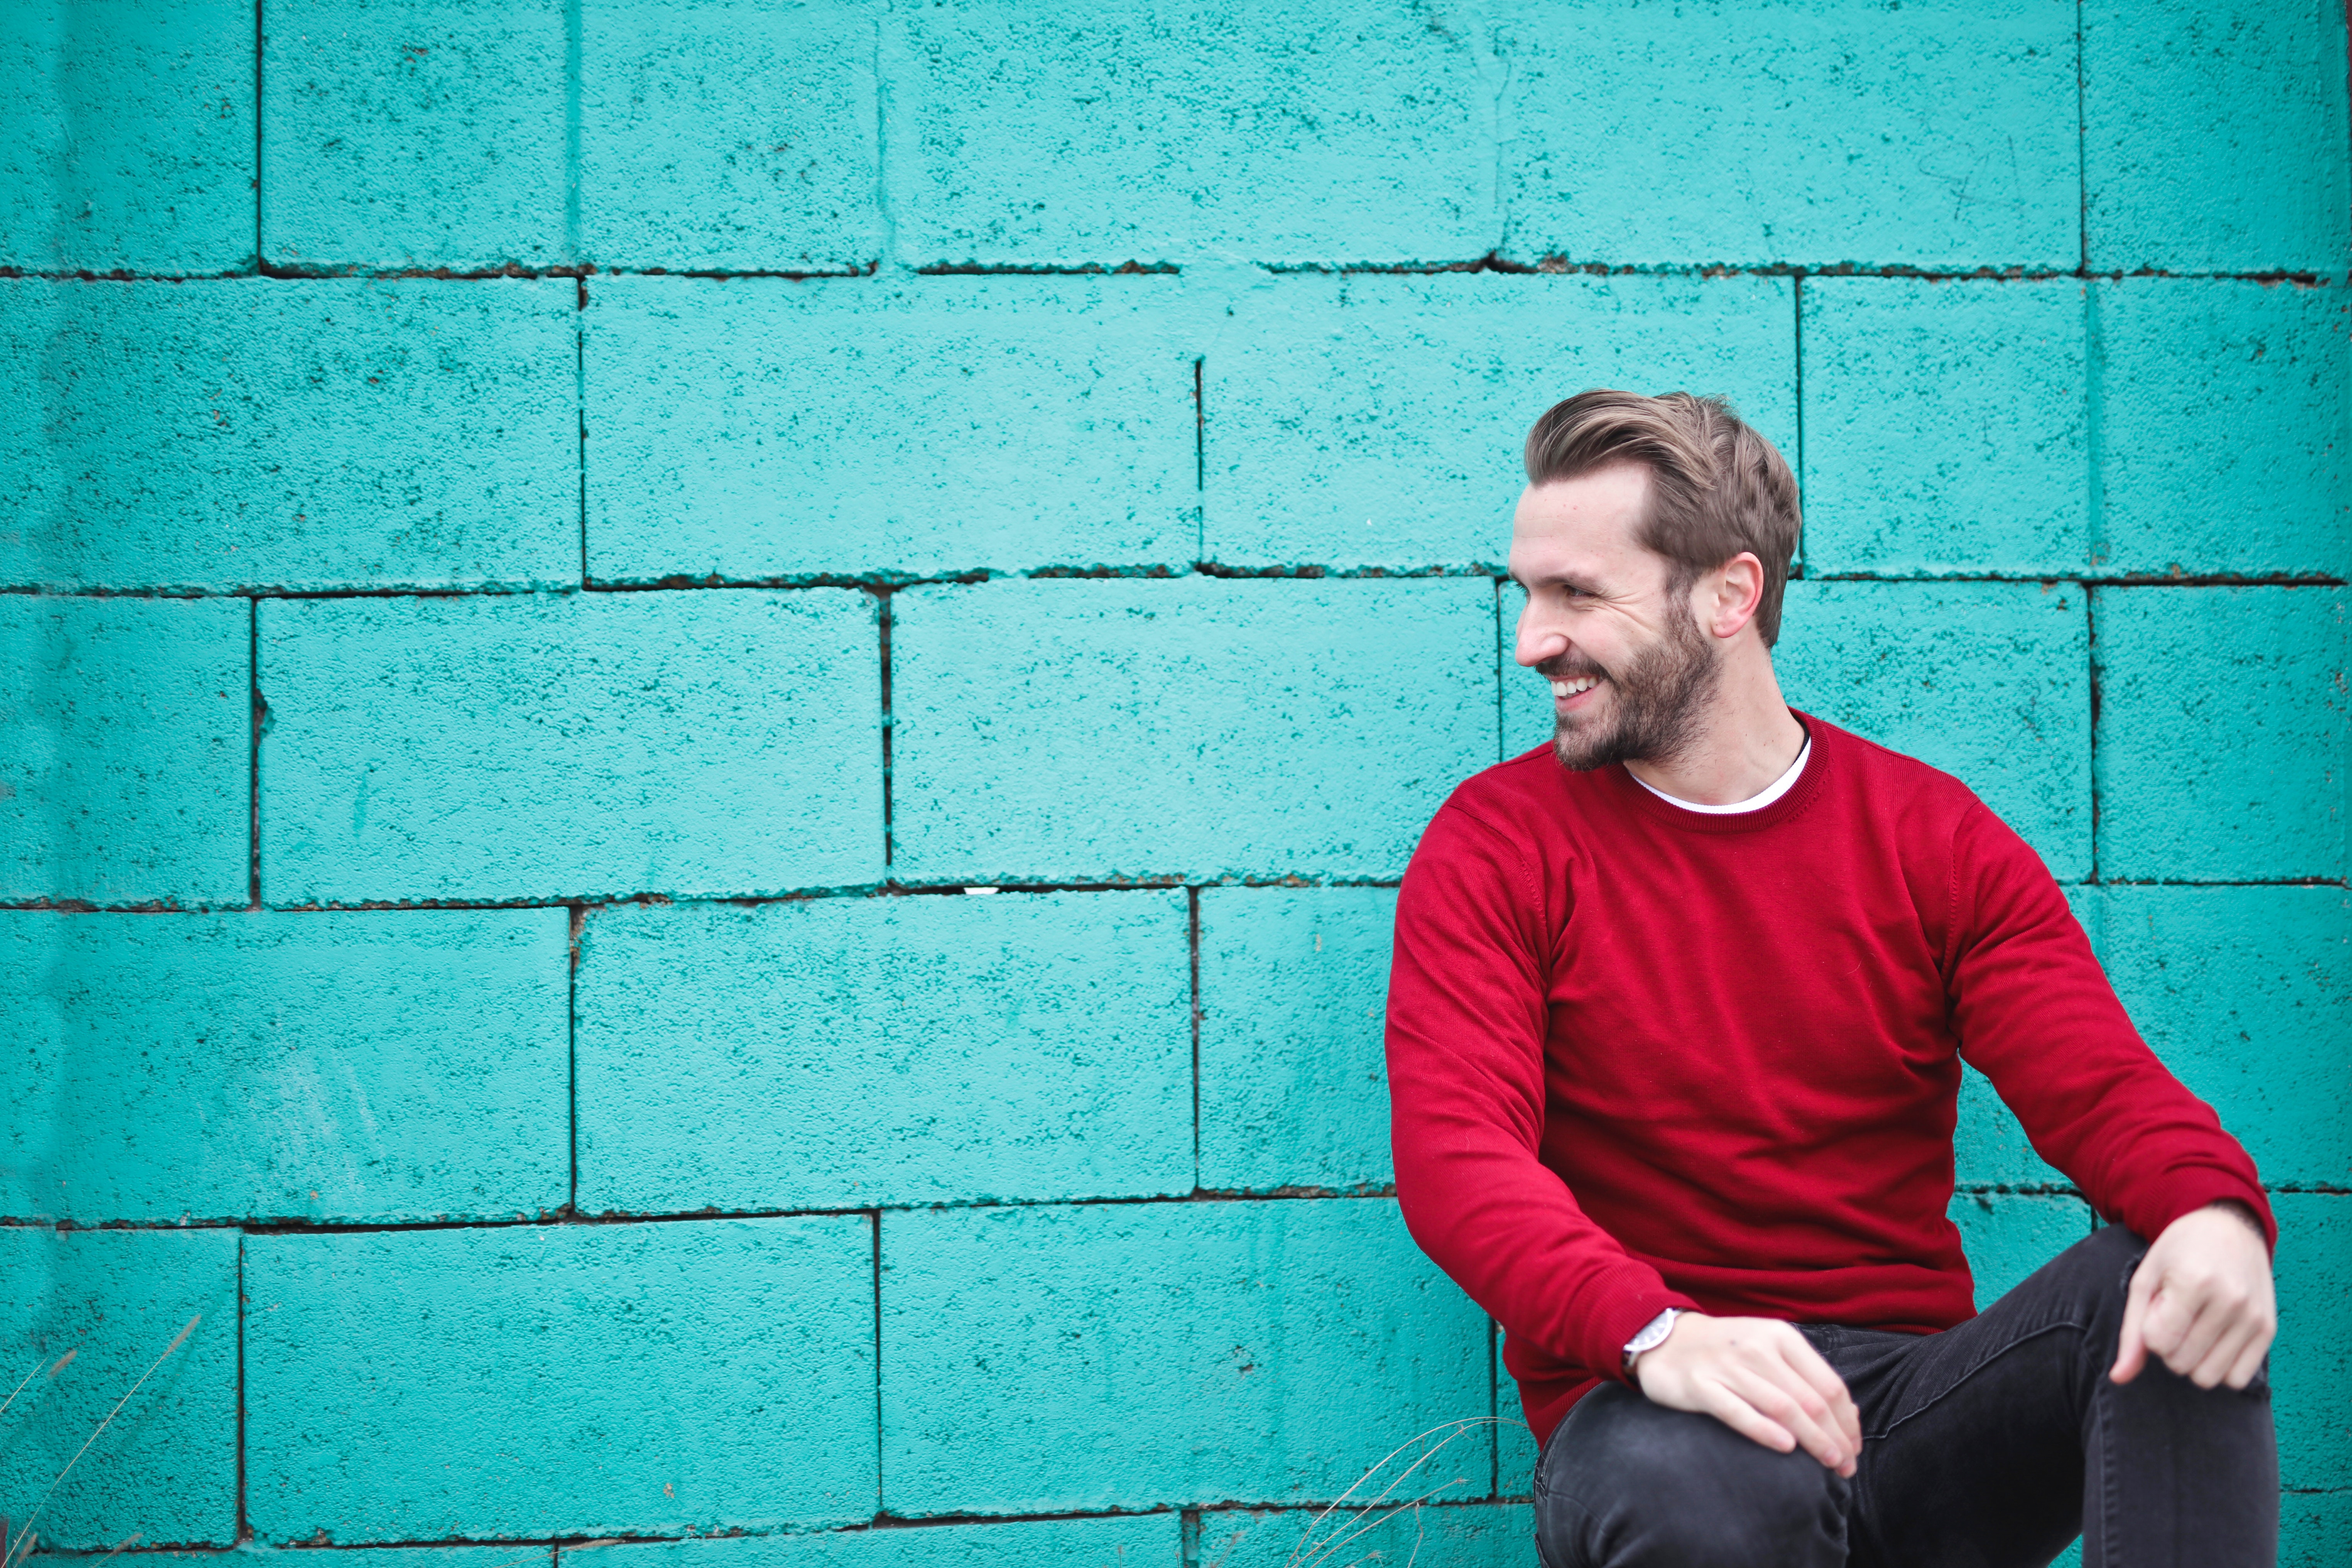 Man Wearing Red Sweatshirt and Black Pants Leaning on the Wall, Adult, Man, Wall, Street, HQ Photo